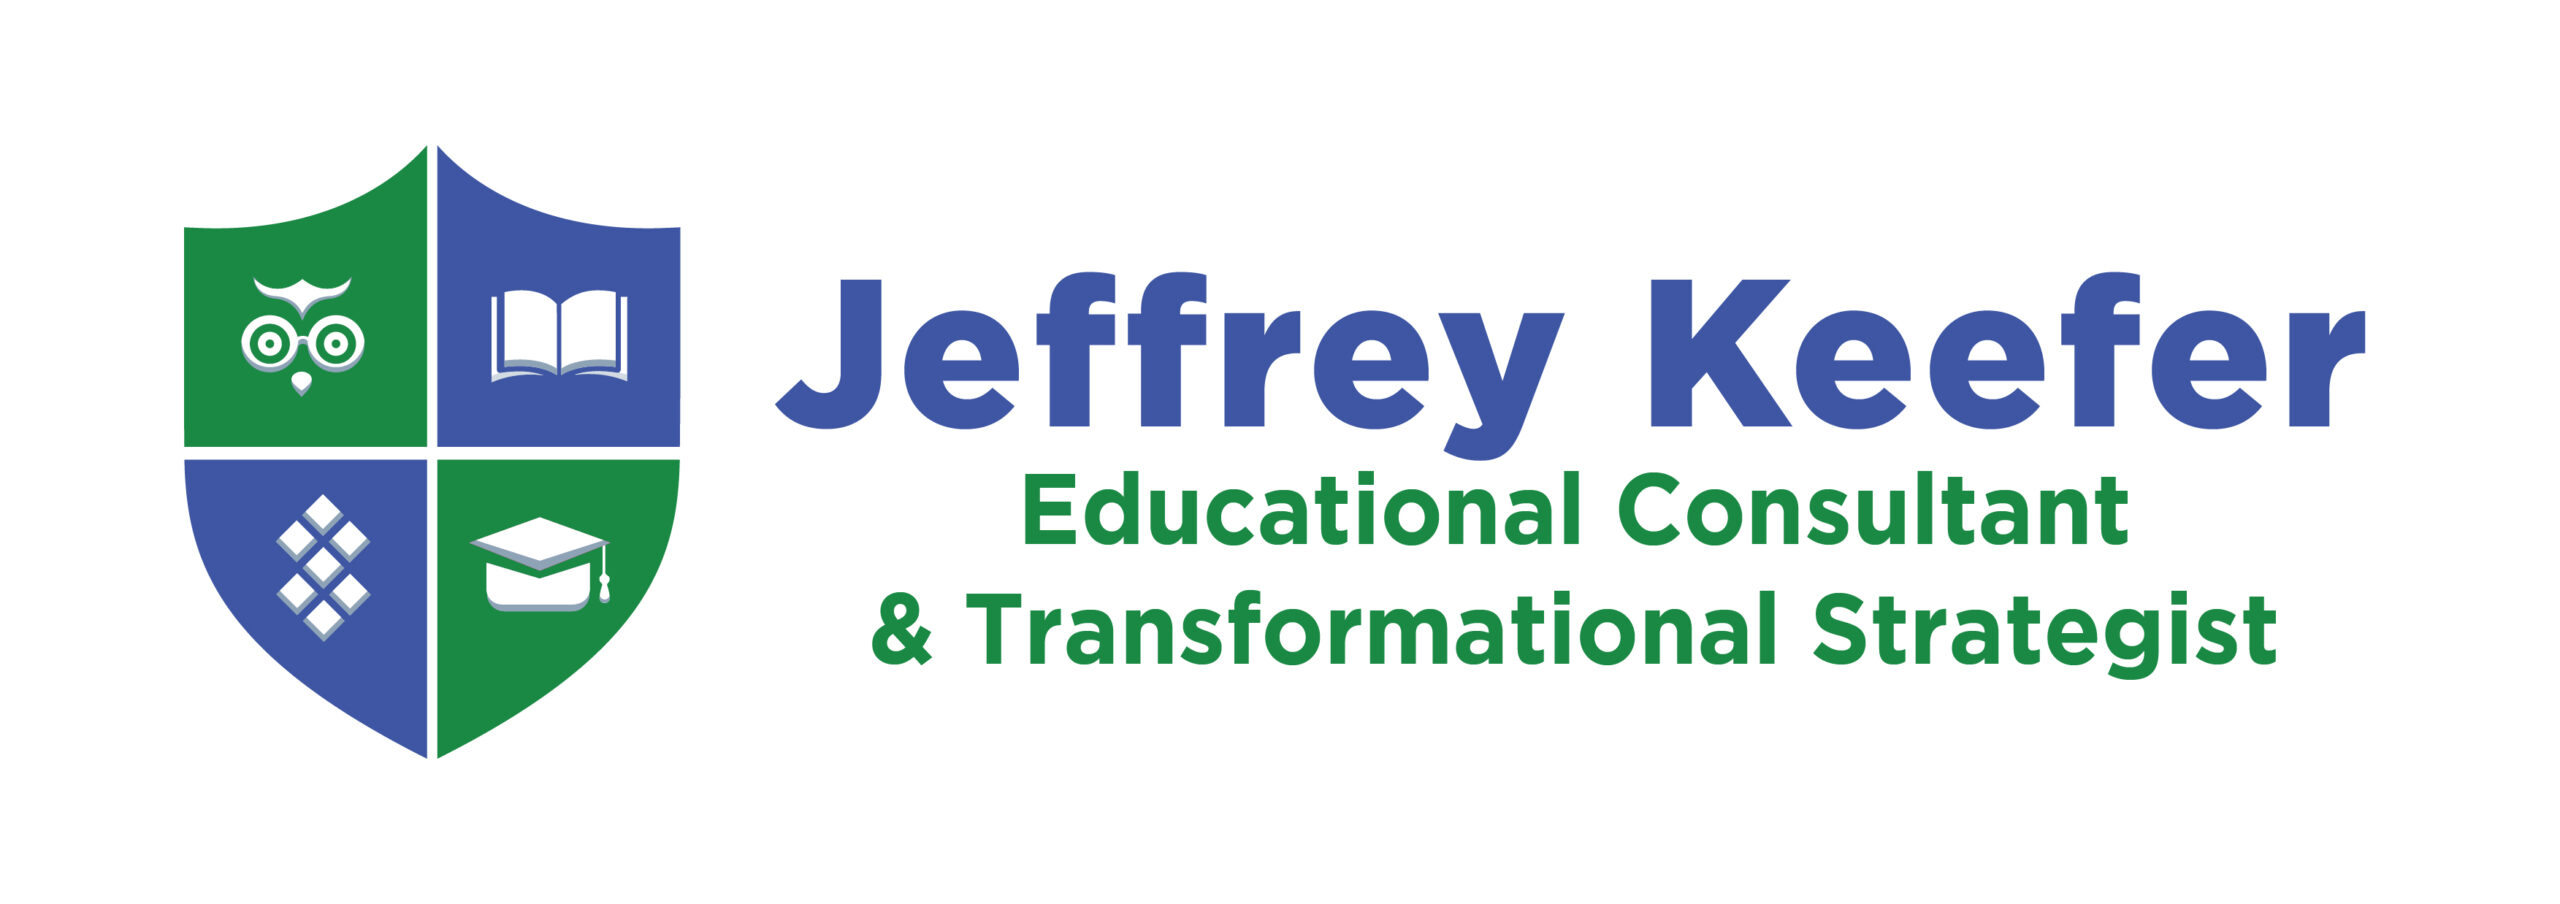 Jeffrey Keefer: Educational Consultant & Transformational Strategist